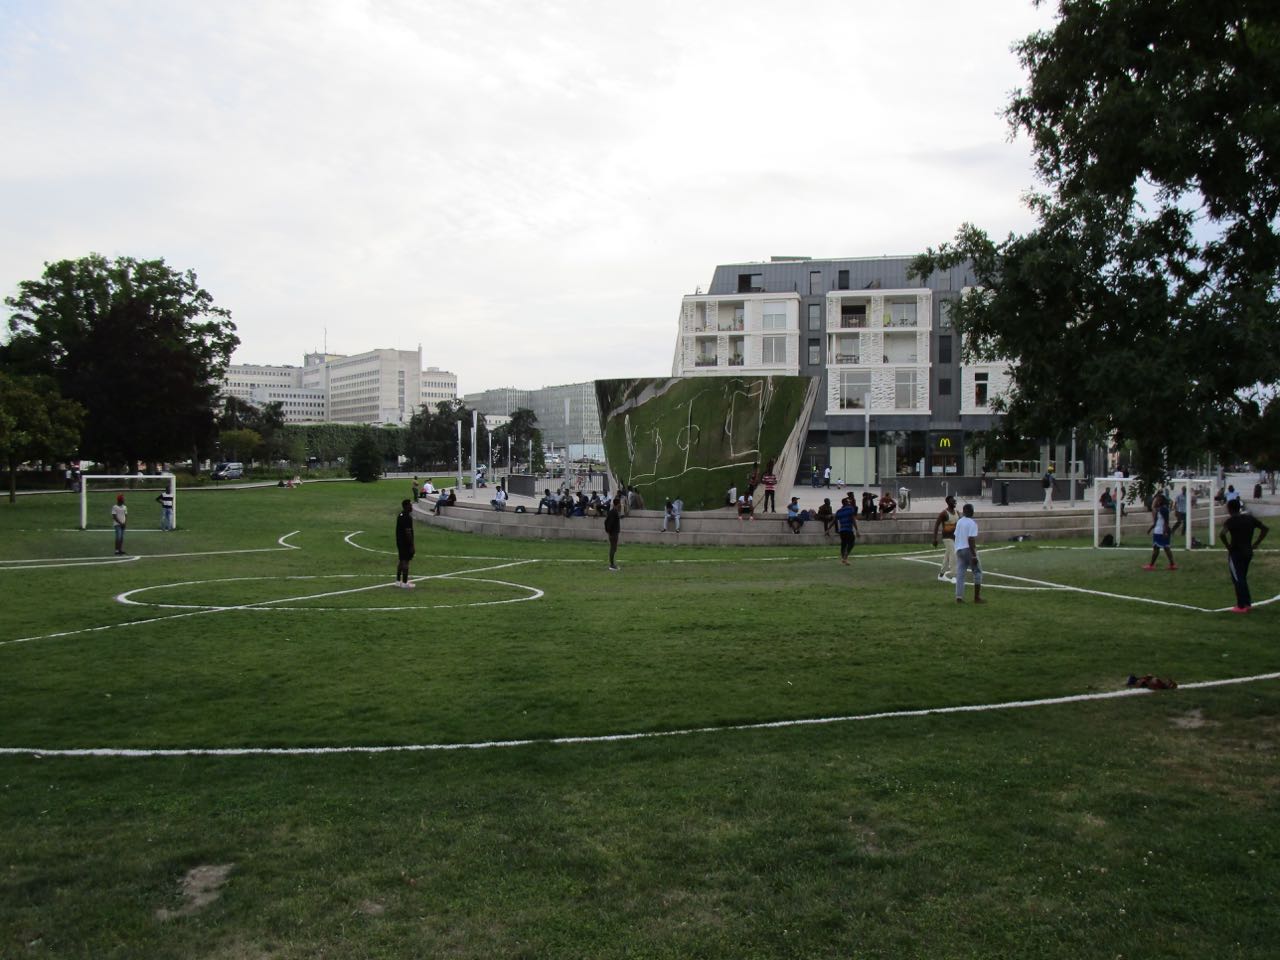 The bent soccer field